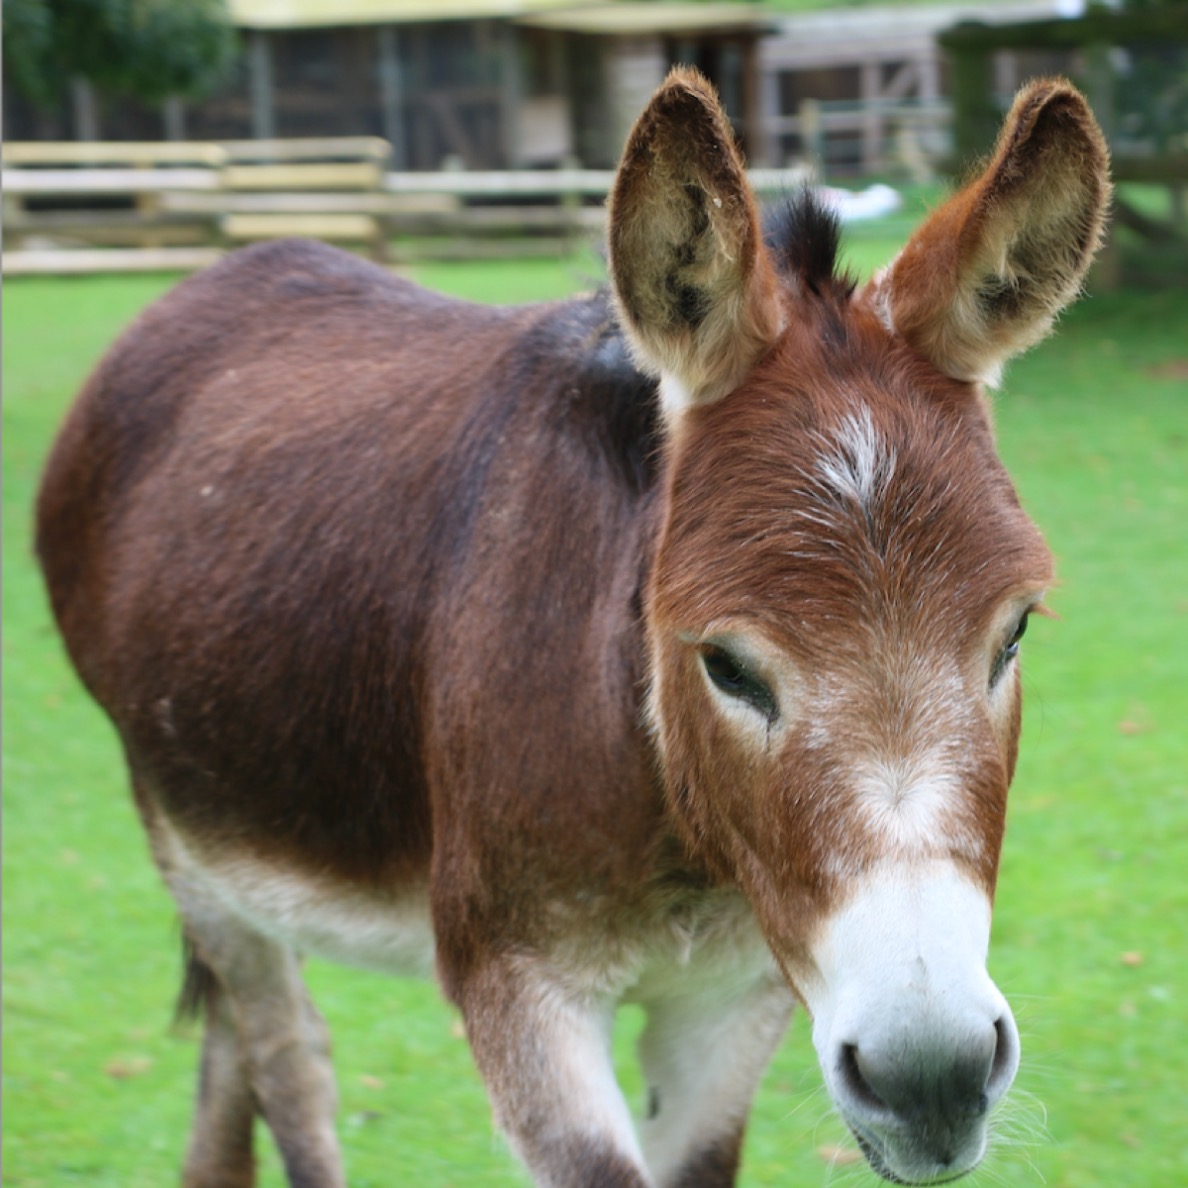 Red the Donkey